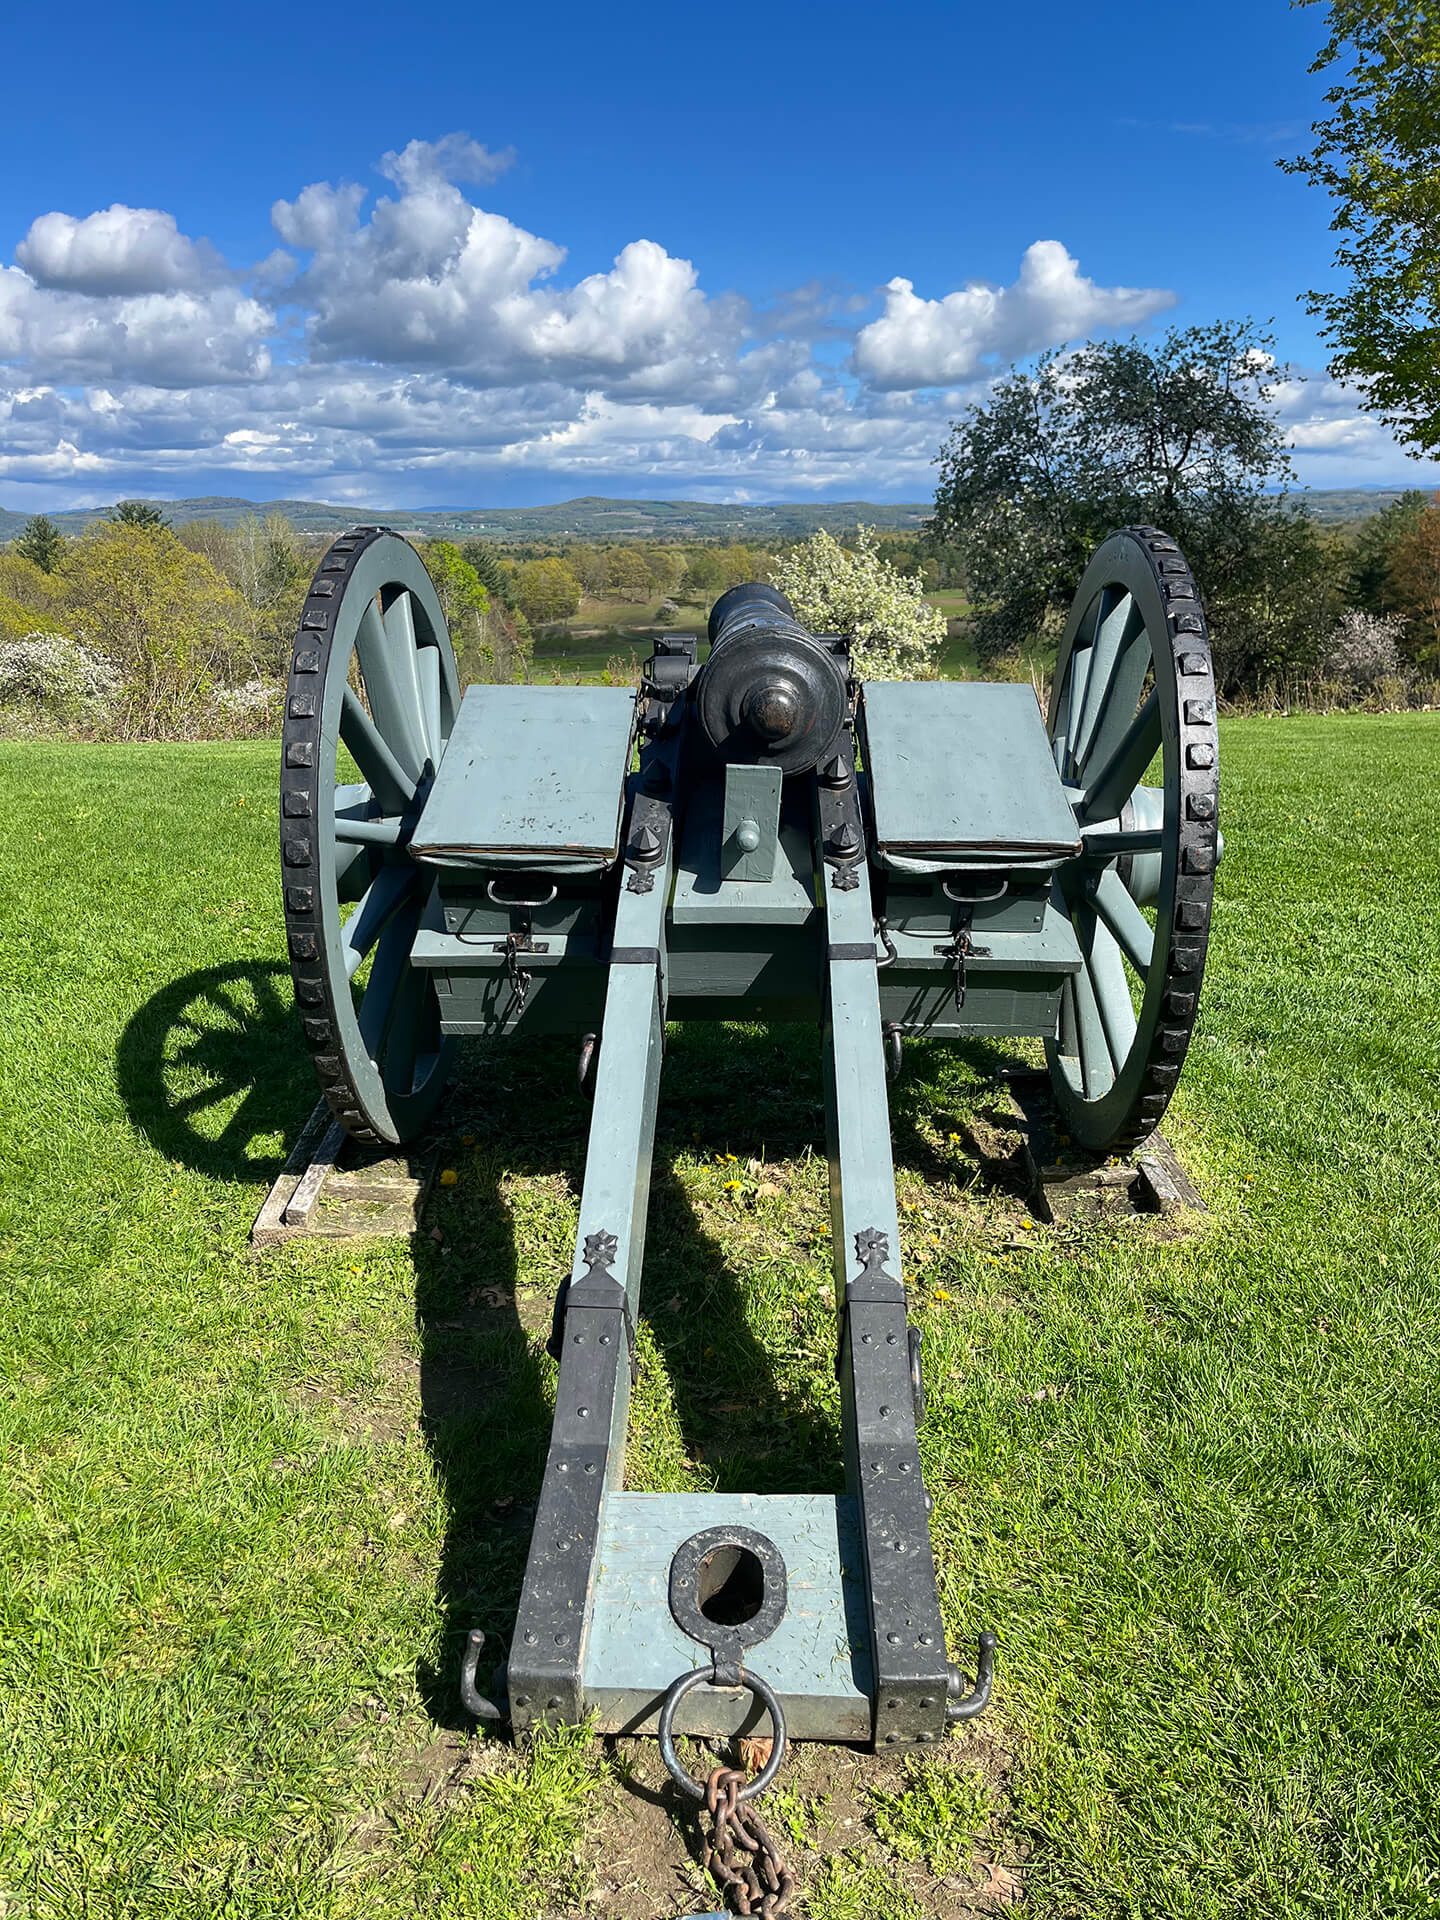 Historical cannon overlooking a valley and distant mountains